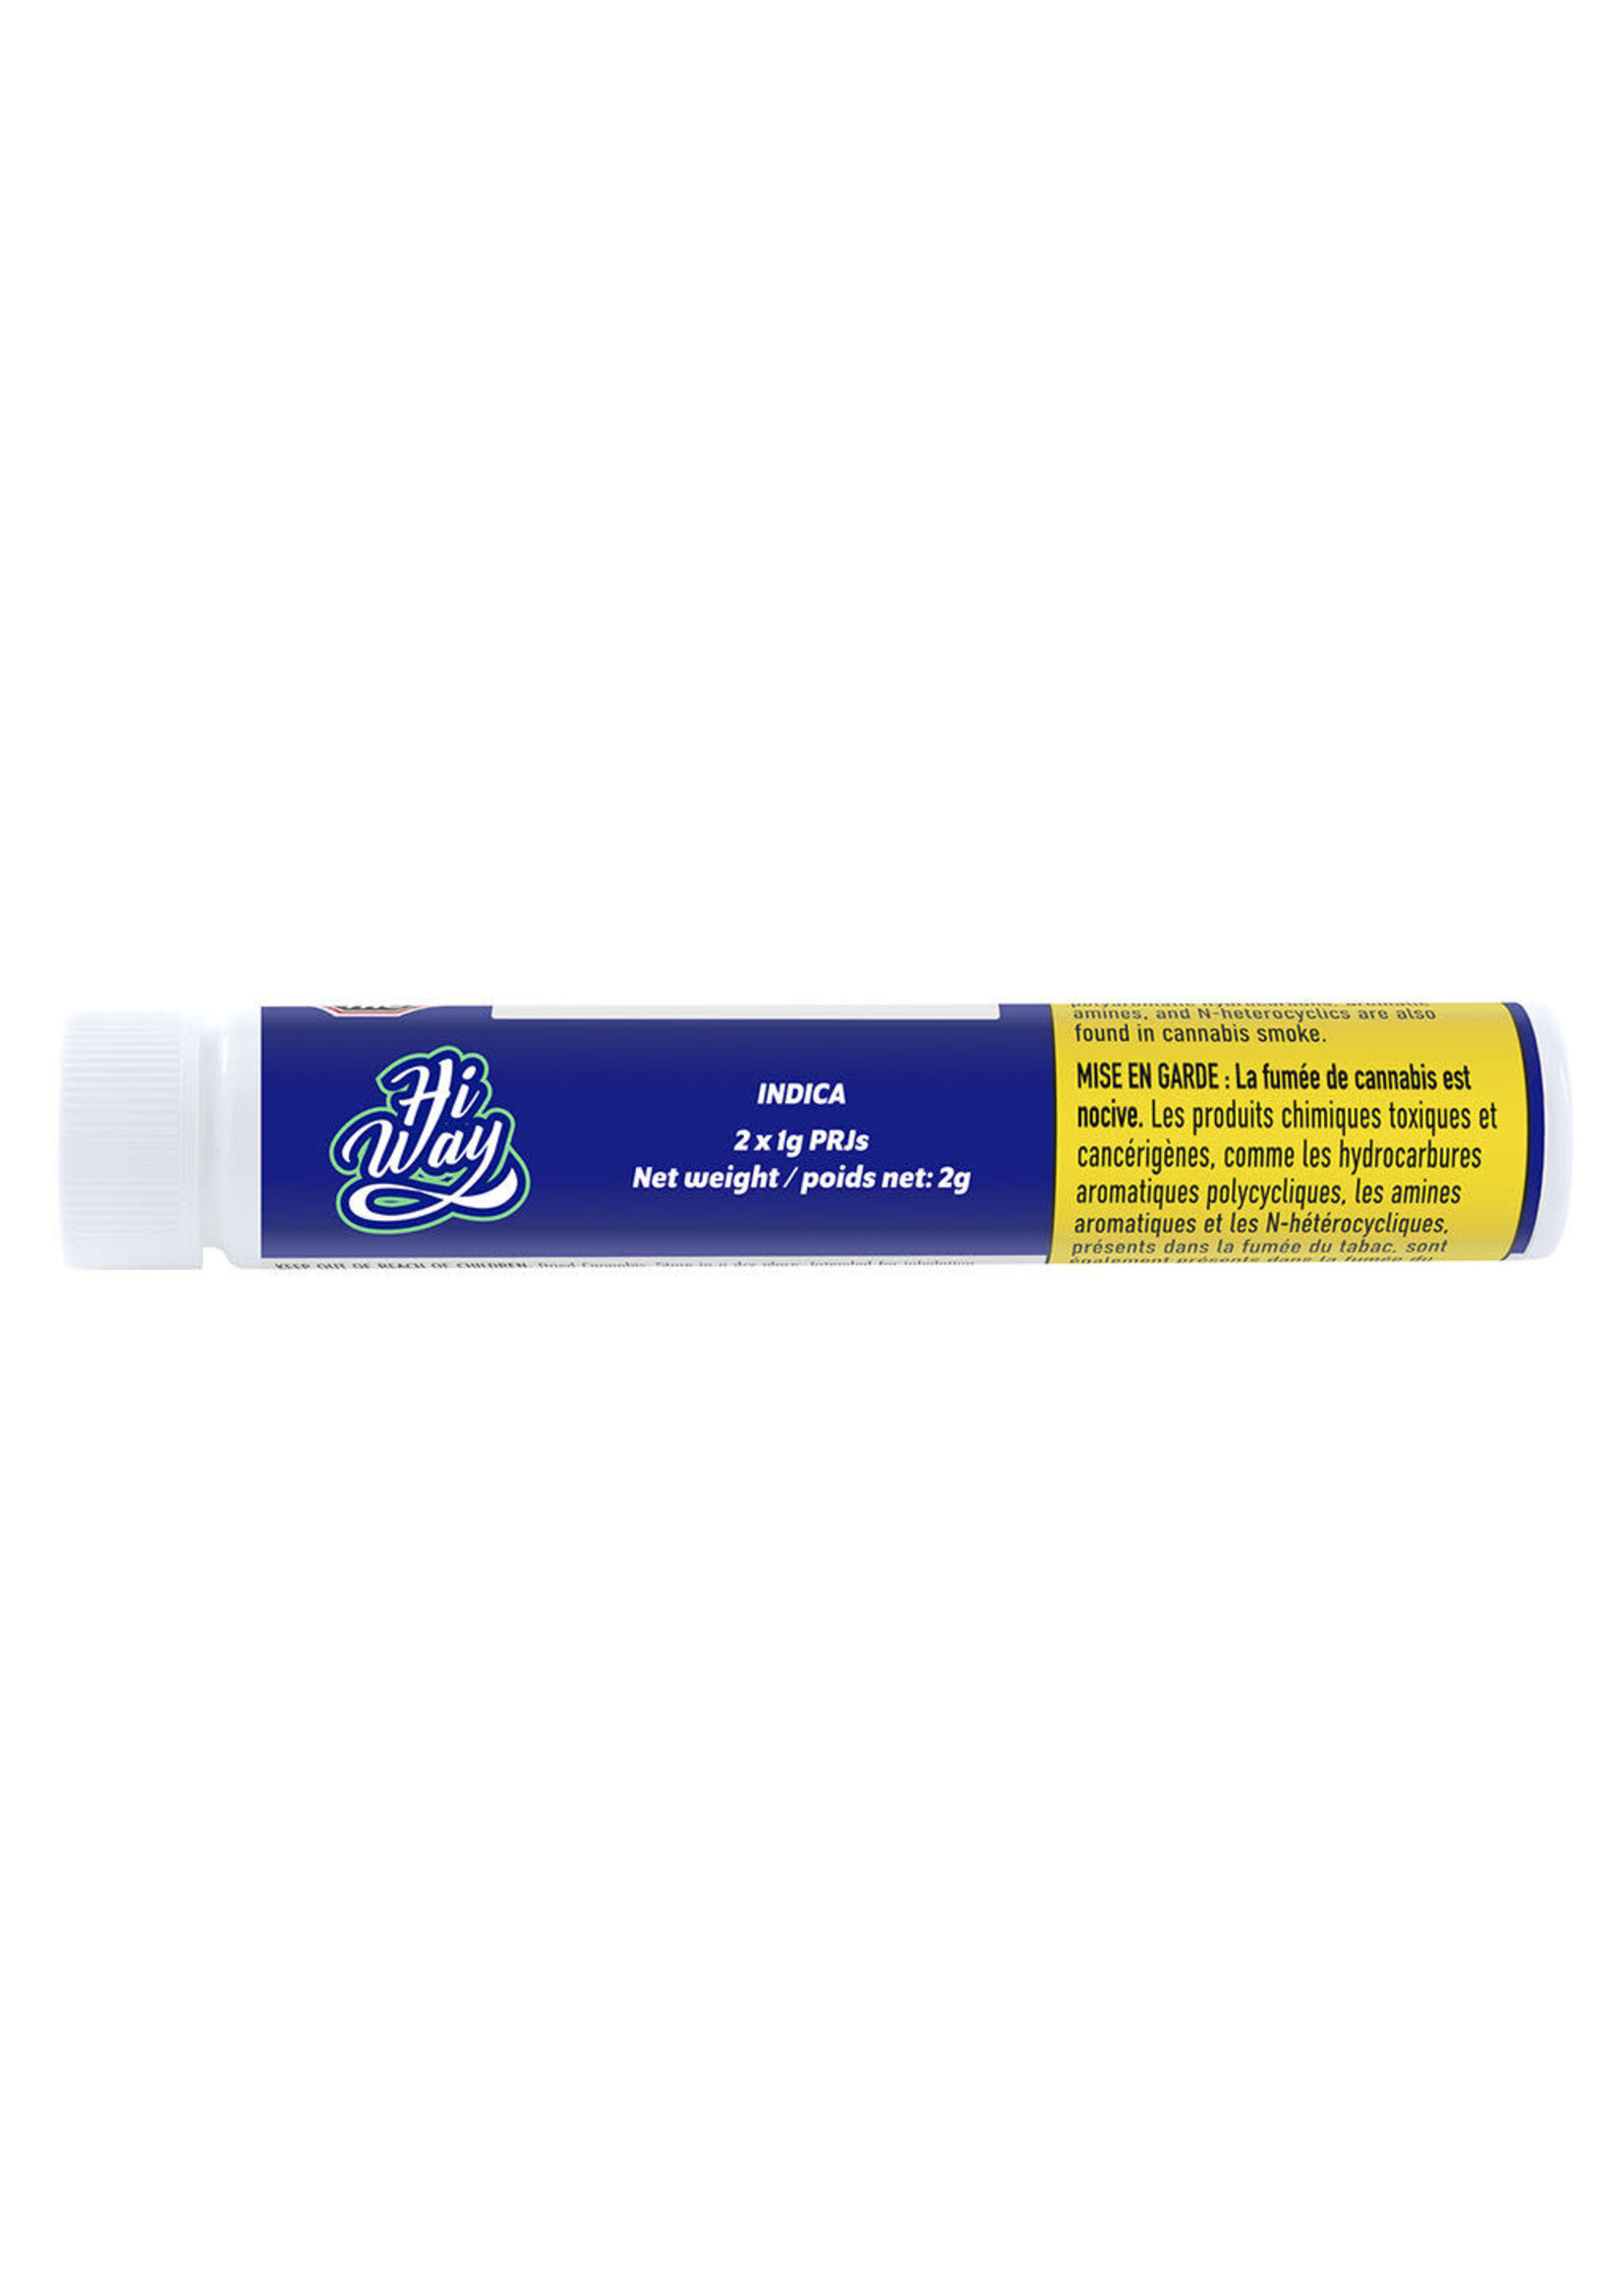 Hiway Hiway Indica Pre-Roll 2.0G